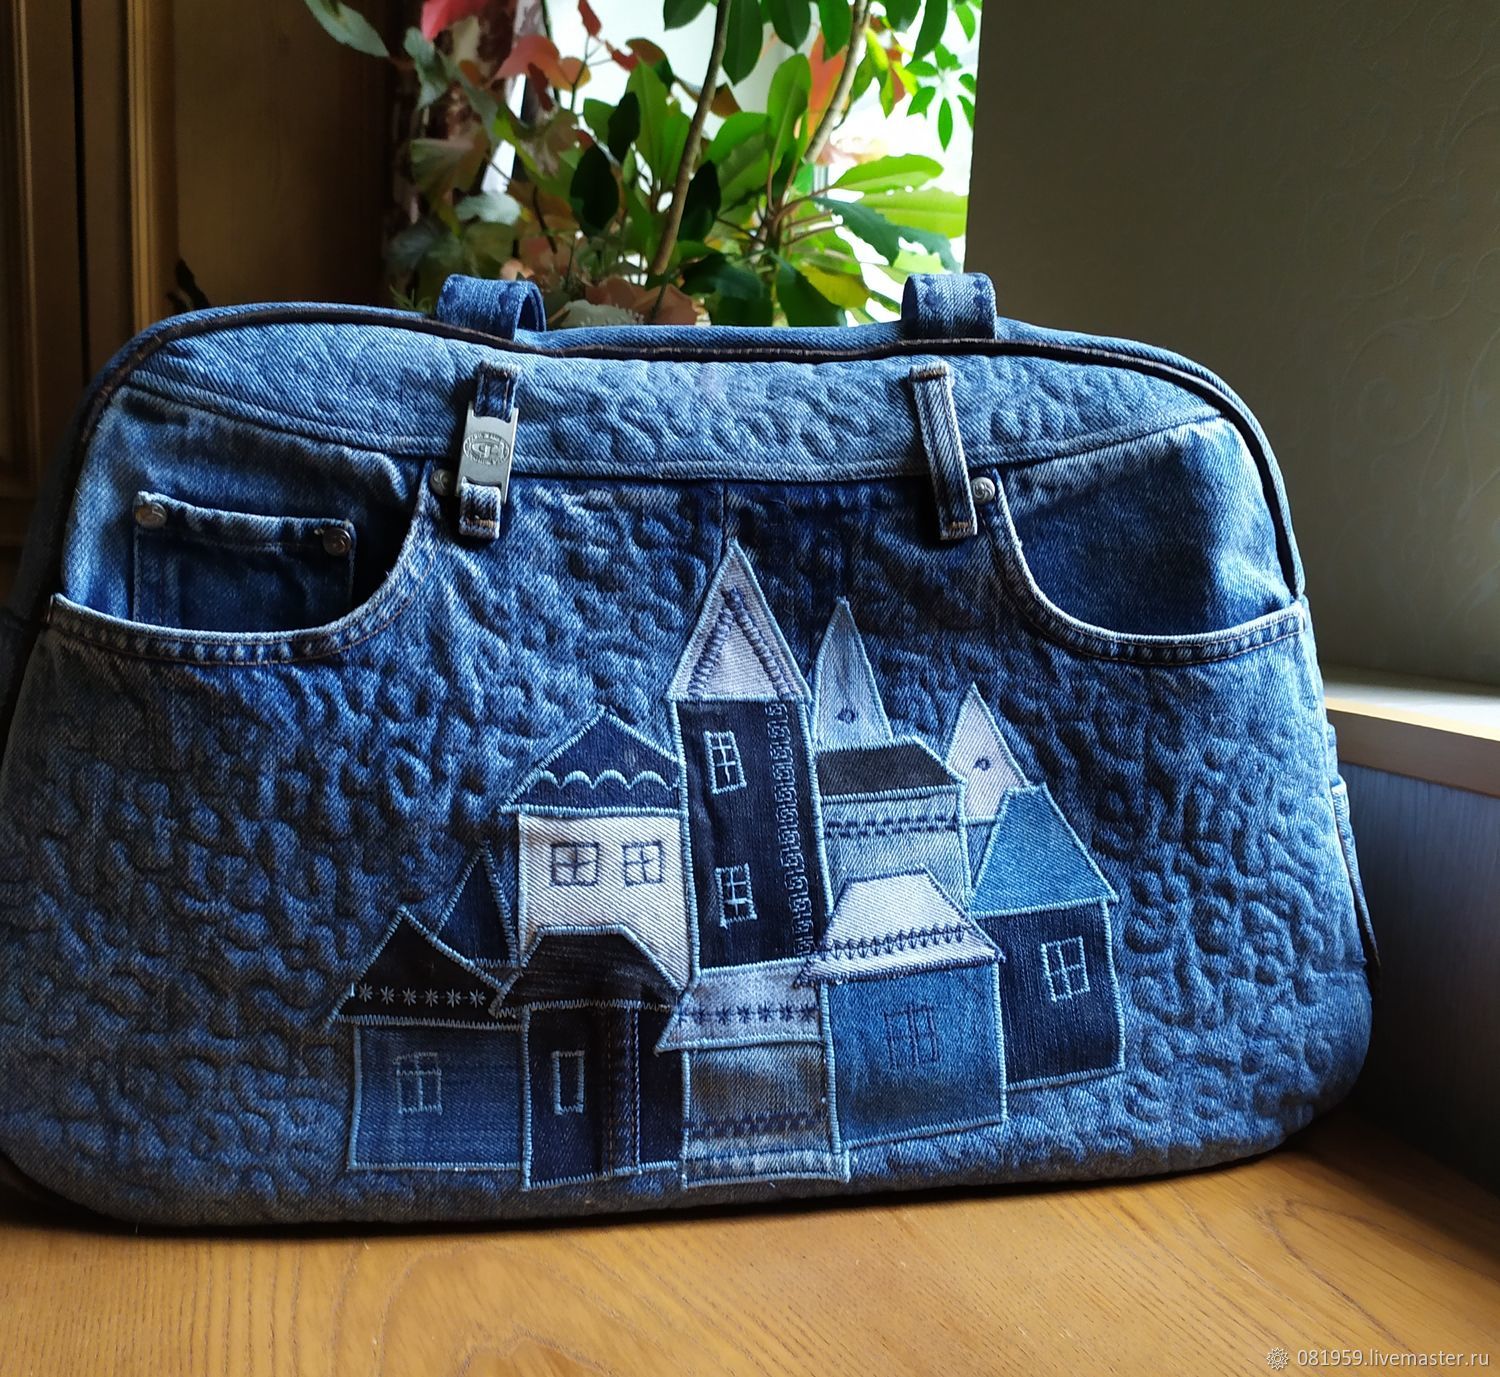  quilted bag made of jeans, Travel bag, St. Petersburg,  Фото №1